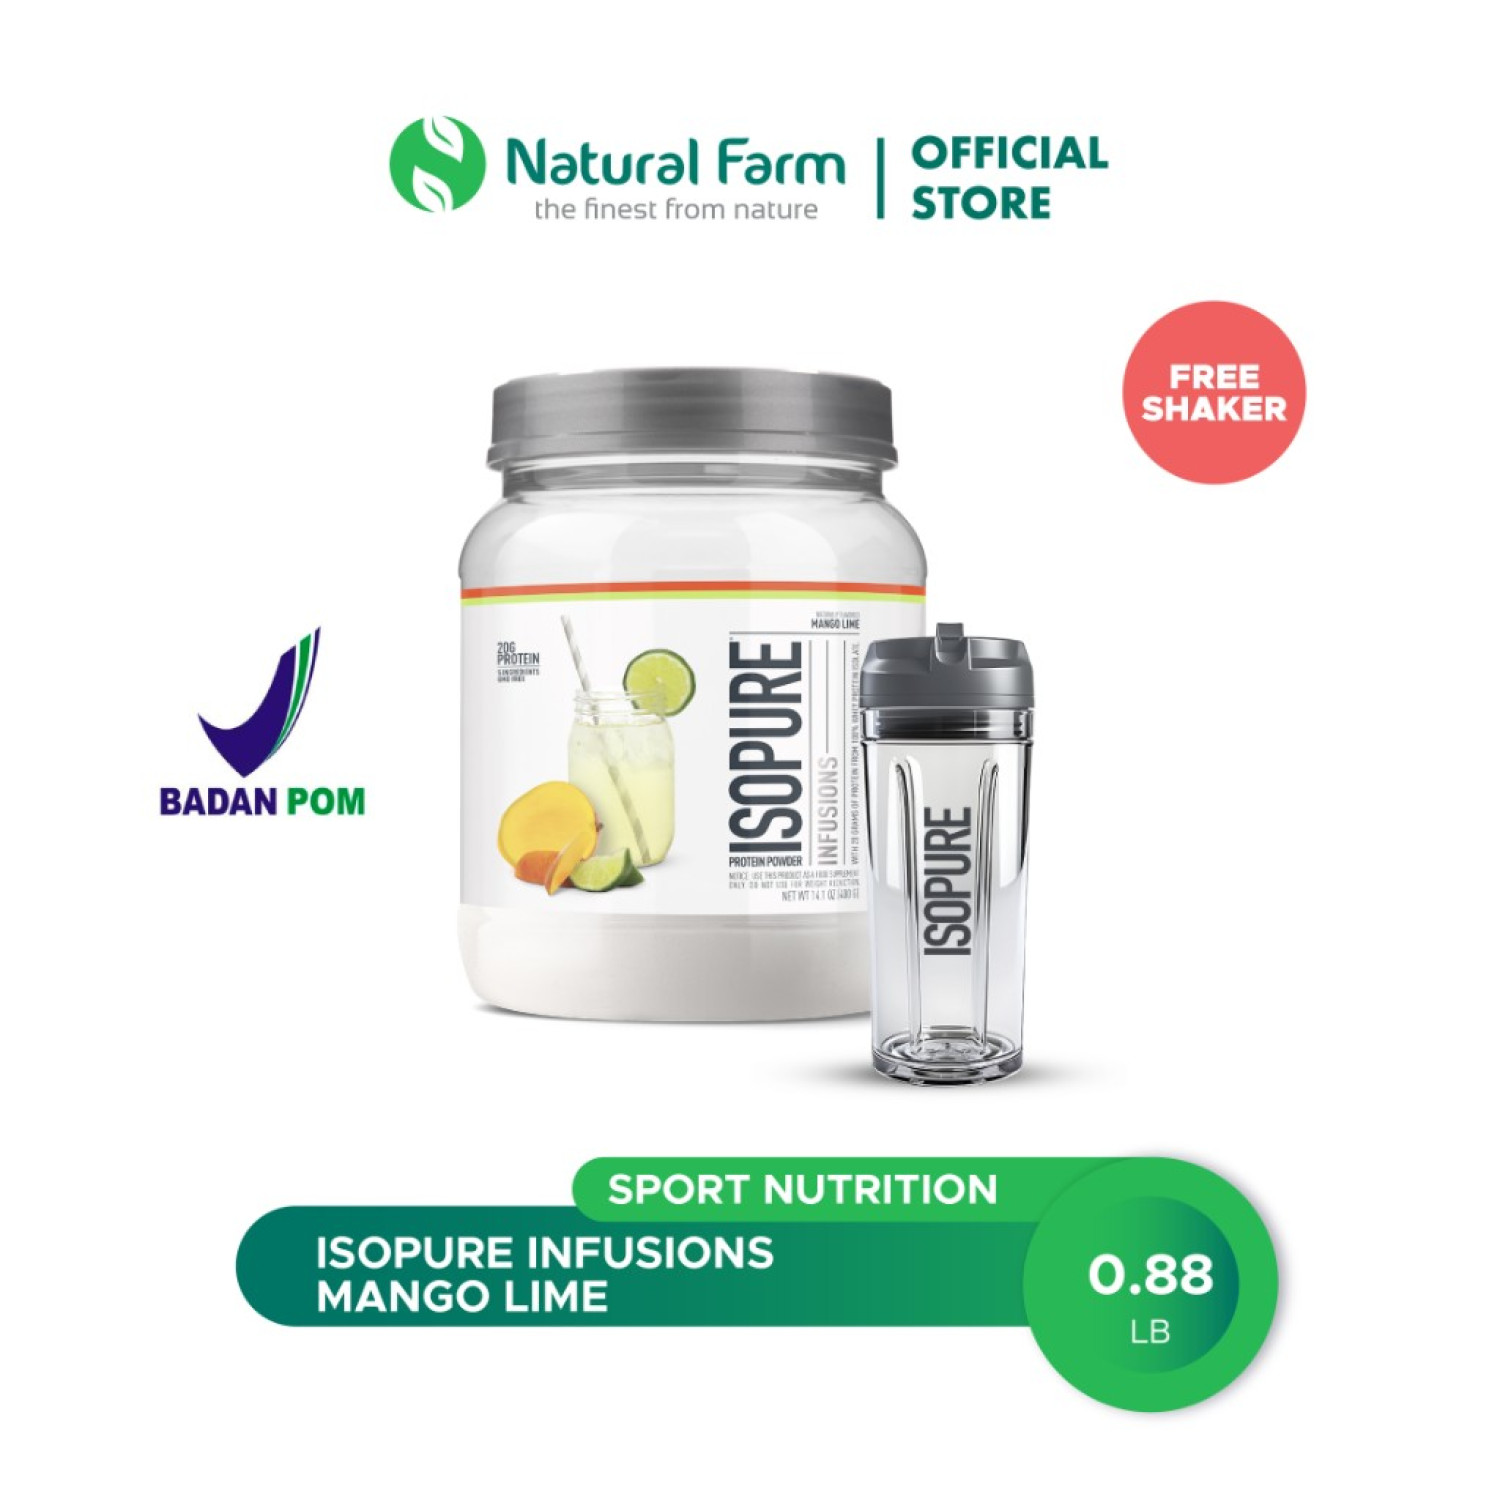 isopure-infusions-088-lb-mango-lime-400g-exp-date-1-25-668664962d745.jpeg